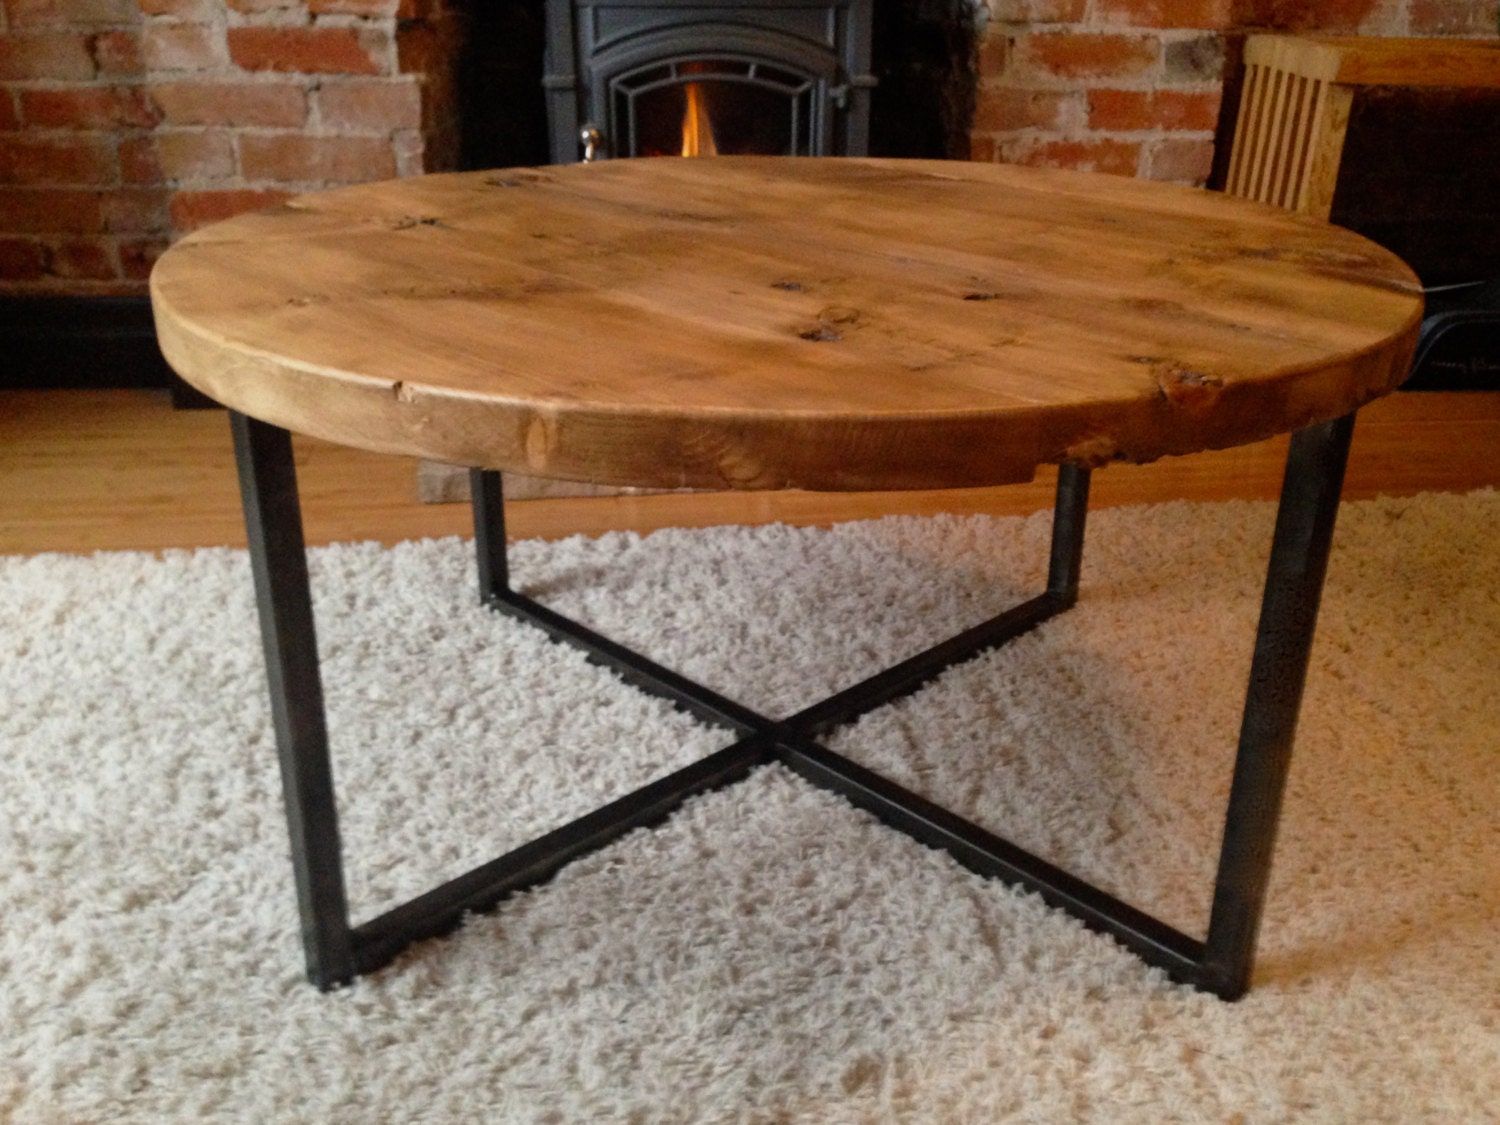 Reclaimed Barn Wood Round Coffee Table With Metal Base Inside Coffee Tables With Round Wooden Tops (View 15 of 15)